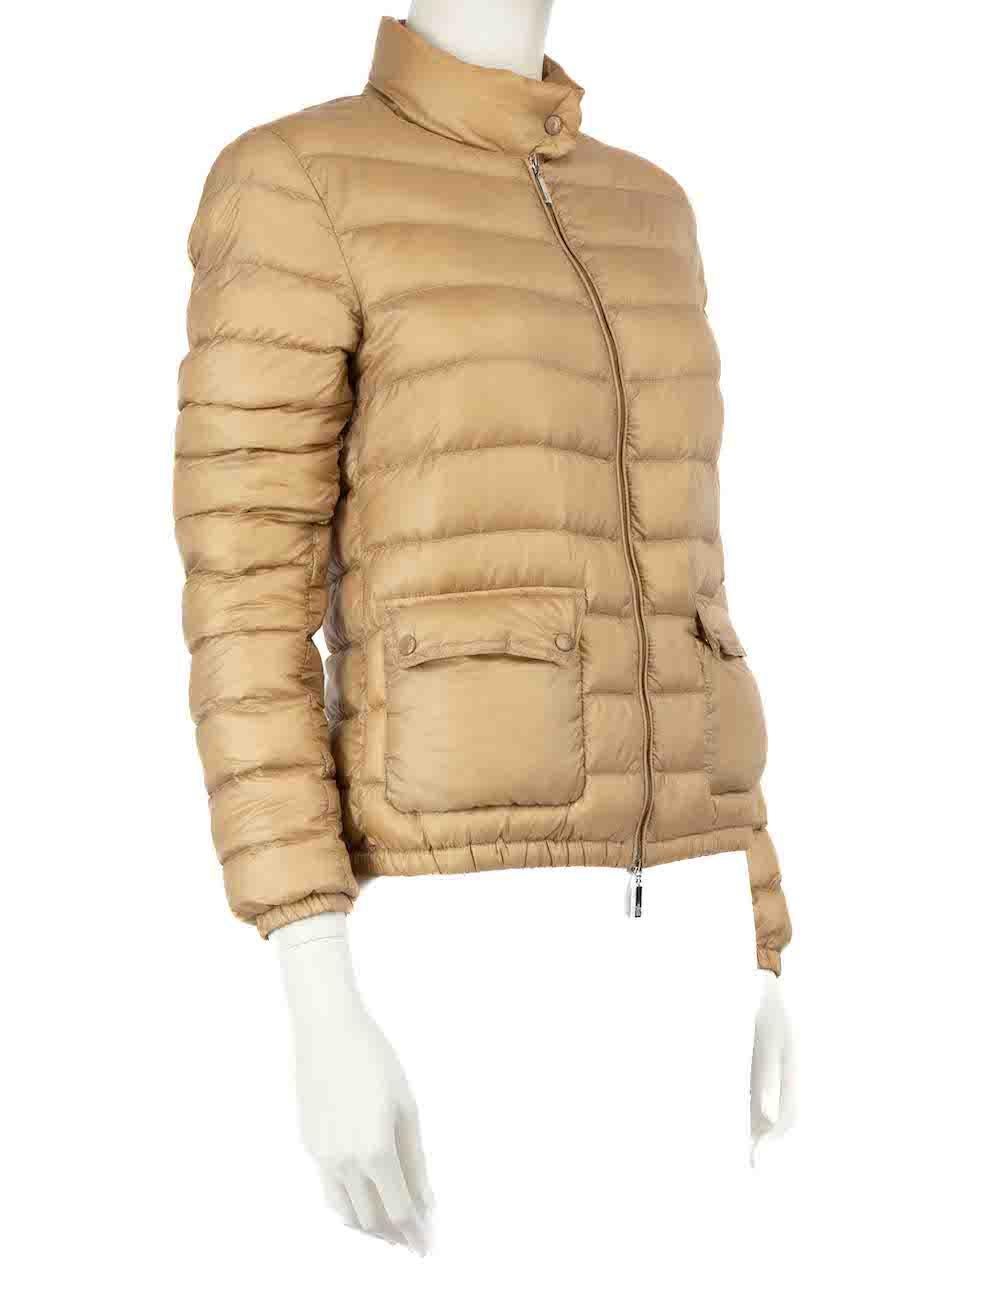 CONDITION is Very good. Minimal wear to coat is evident. Minimal wear to both underarms with slight darkening at the lining and small mark on the right sleeve on this used Moncler designer resale item. This item comes with original bag.
 
 Details
